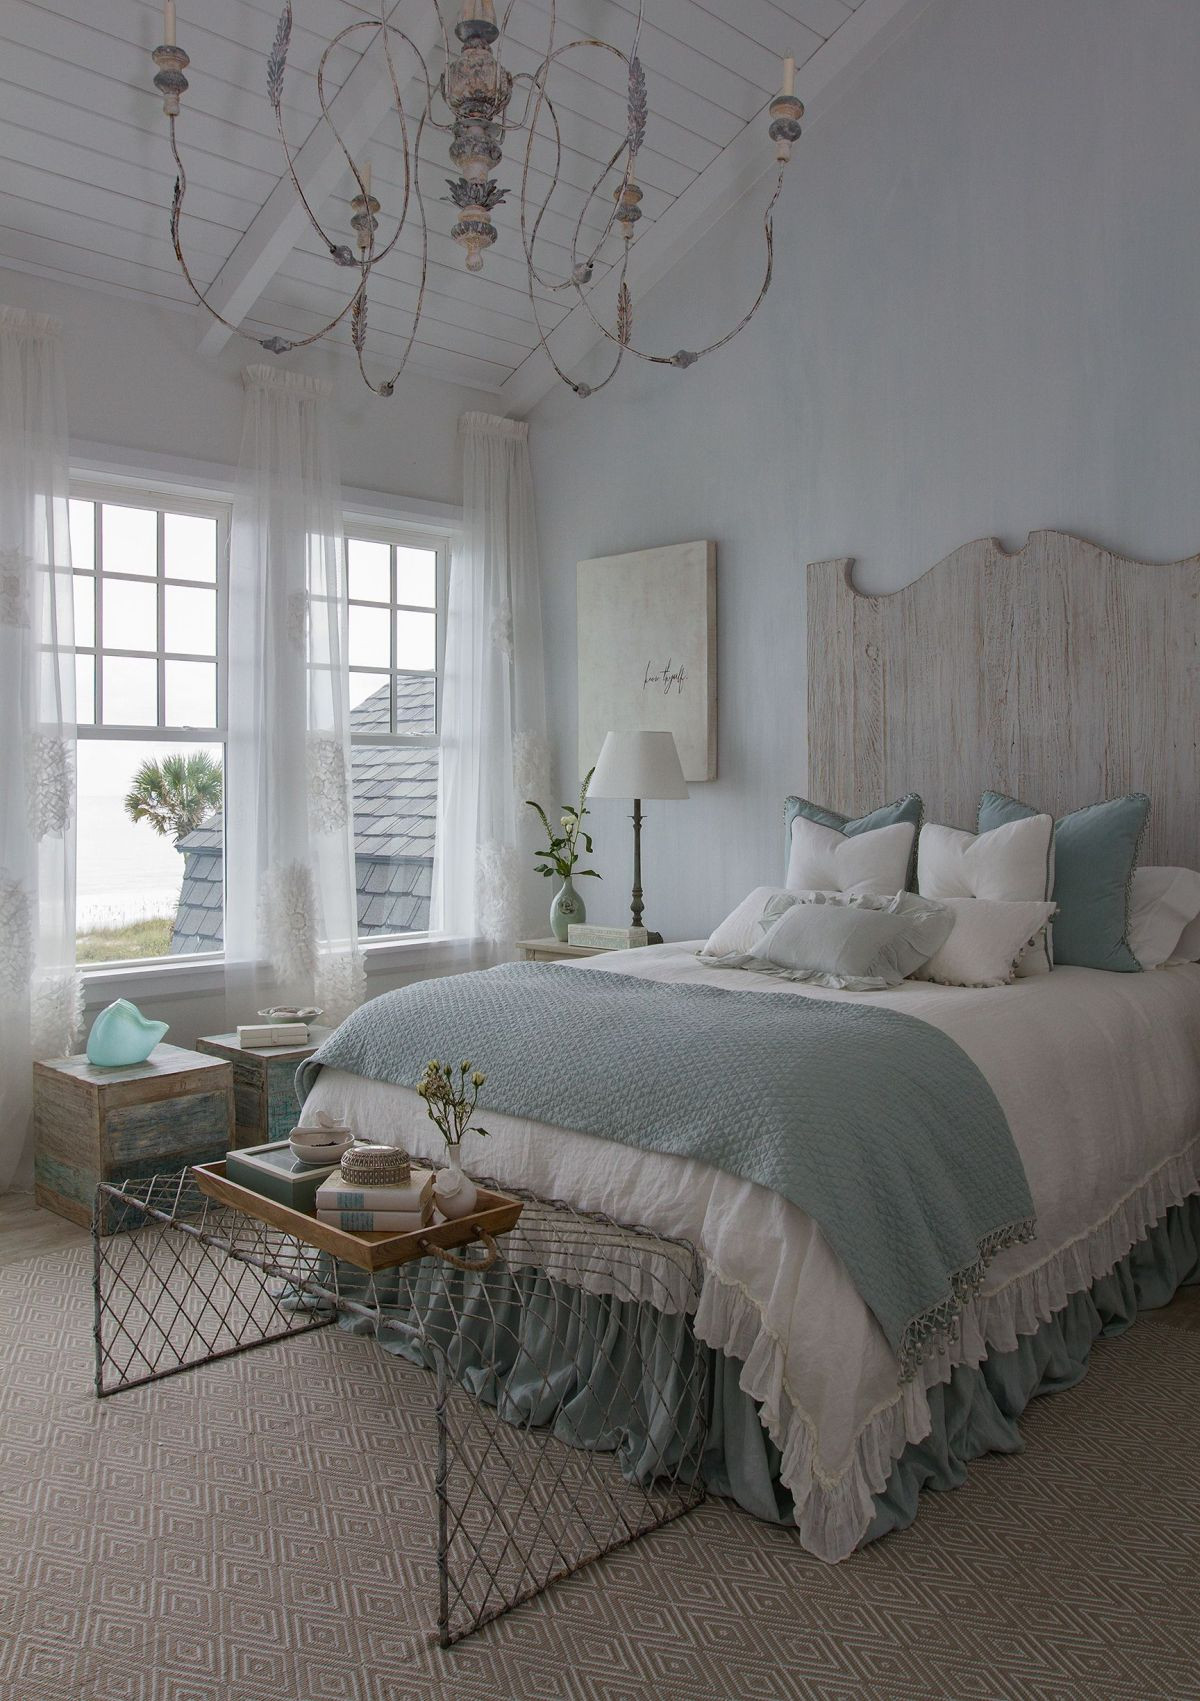 Beach Bedroom Decor Ideas
 40 Beach Themed Bedrooms to Take You Away